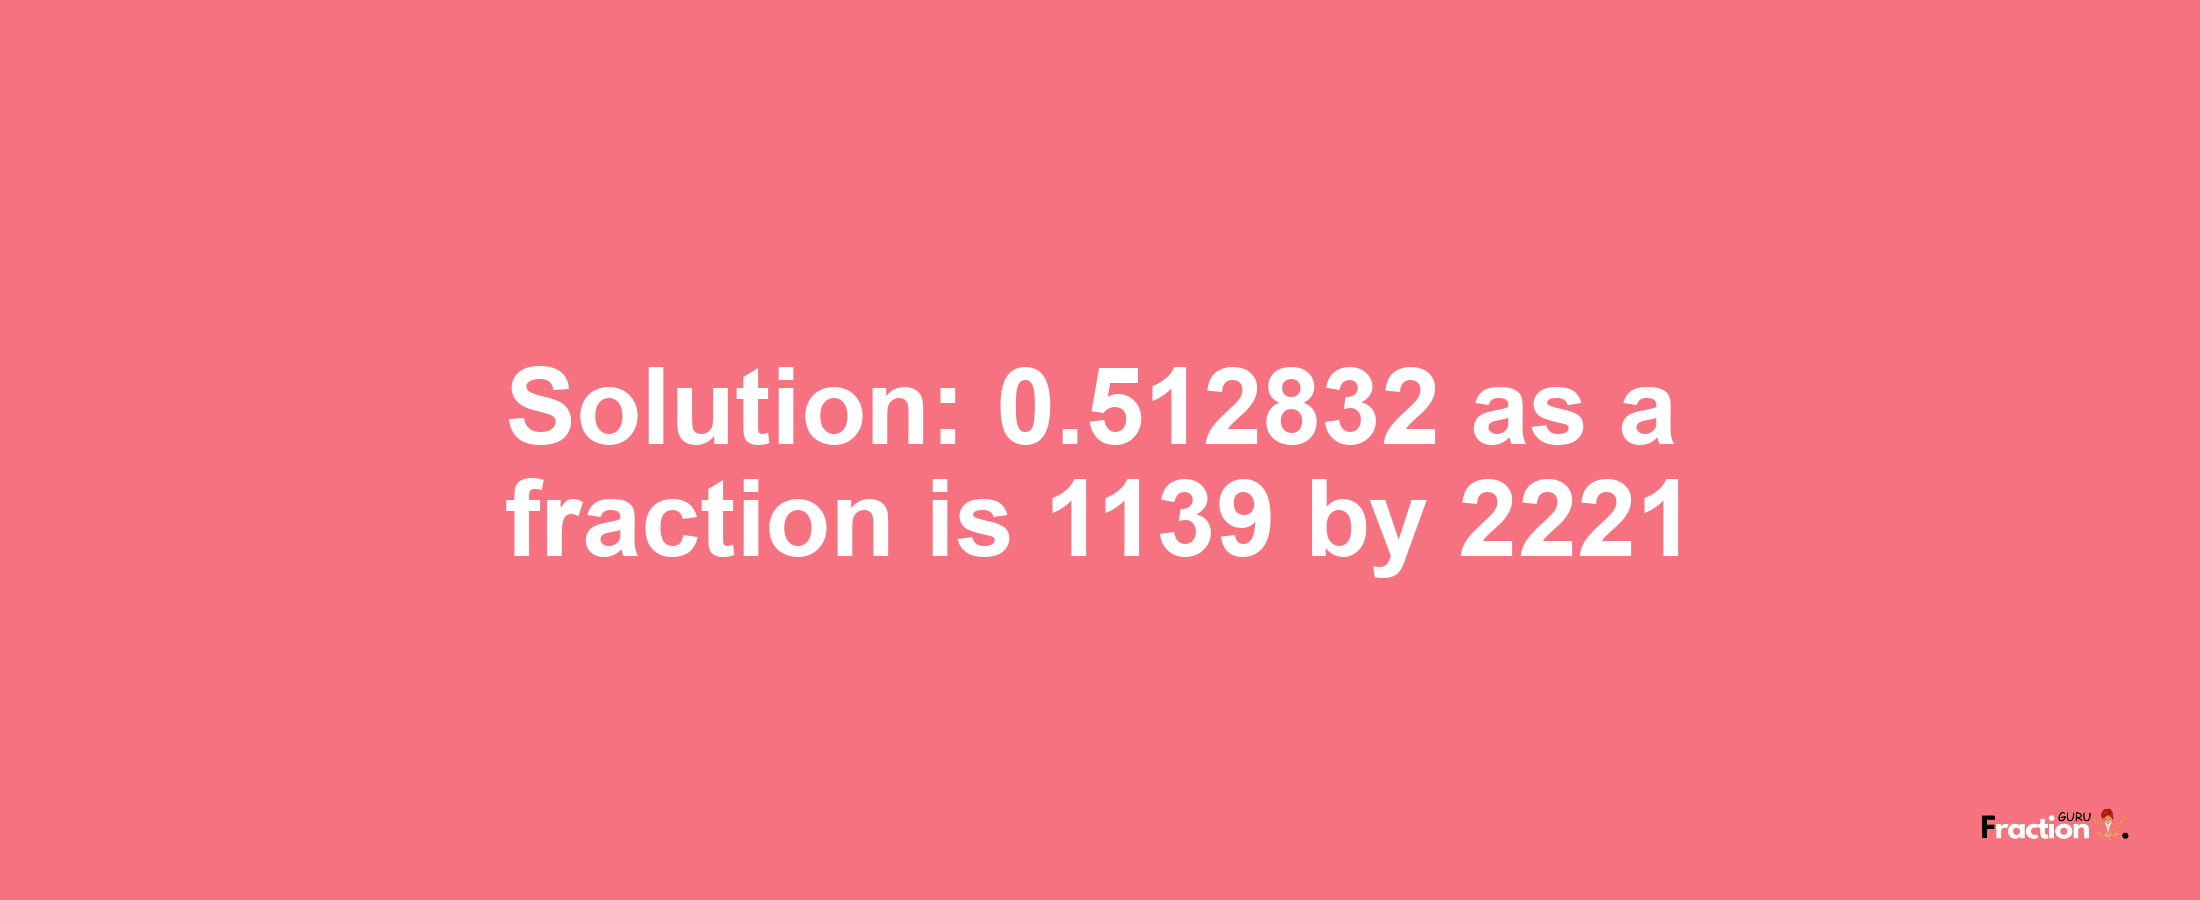 Solution:0.512832 as a fraction is 1139/2221